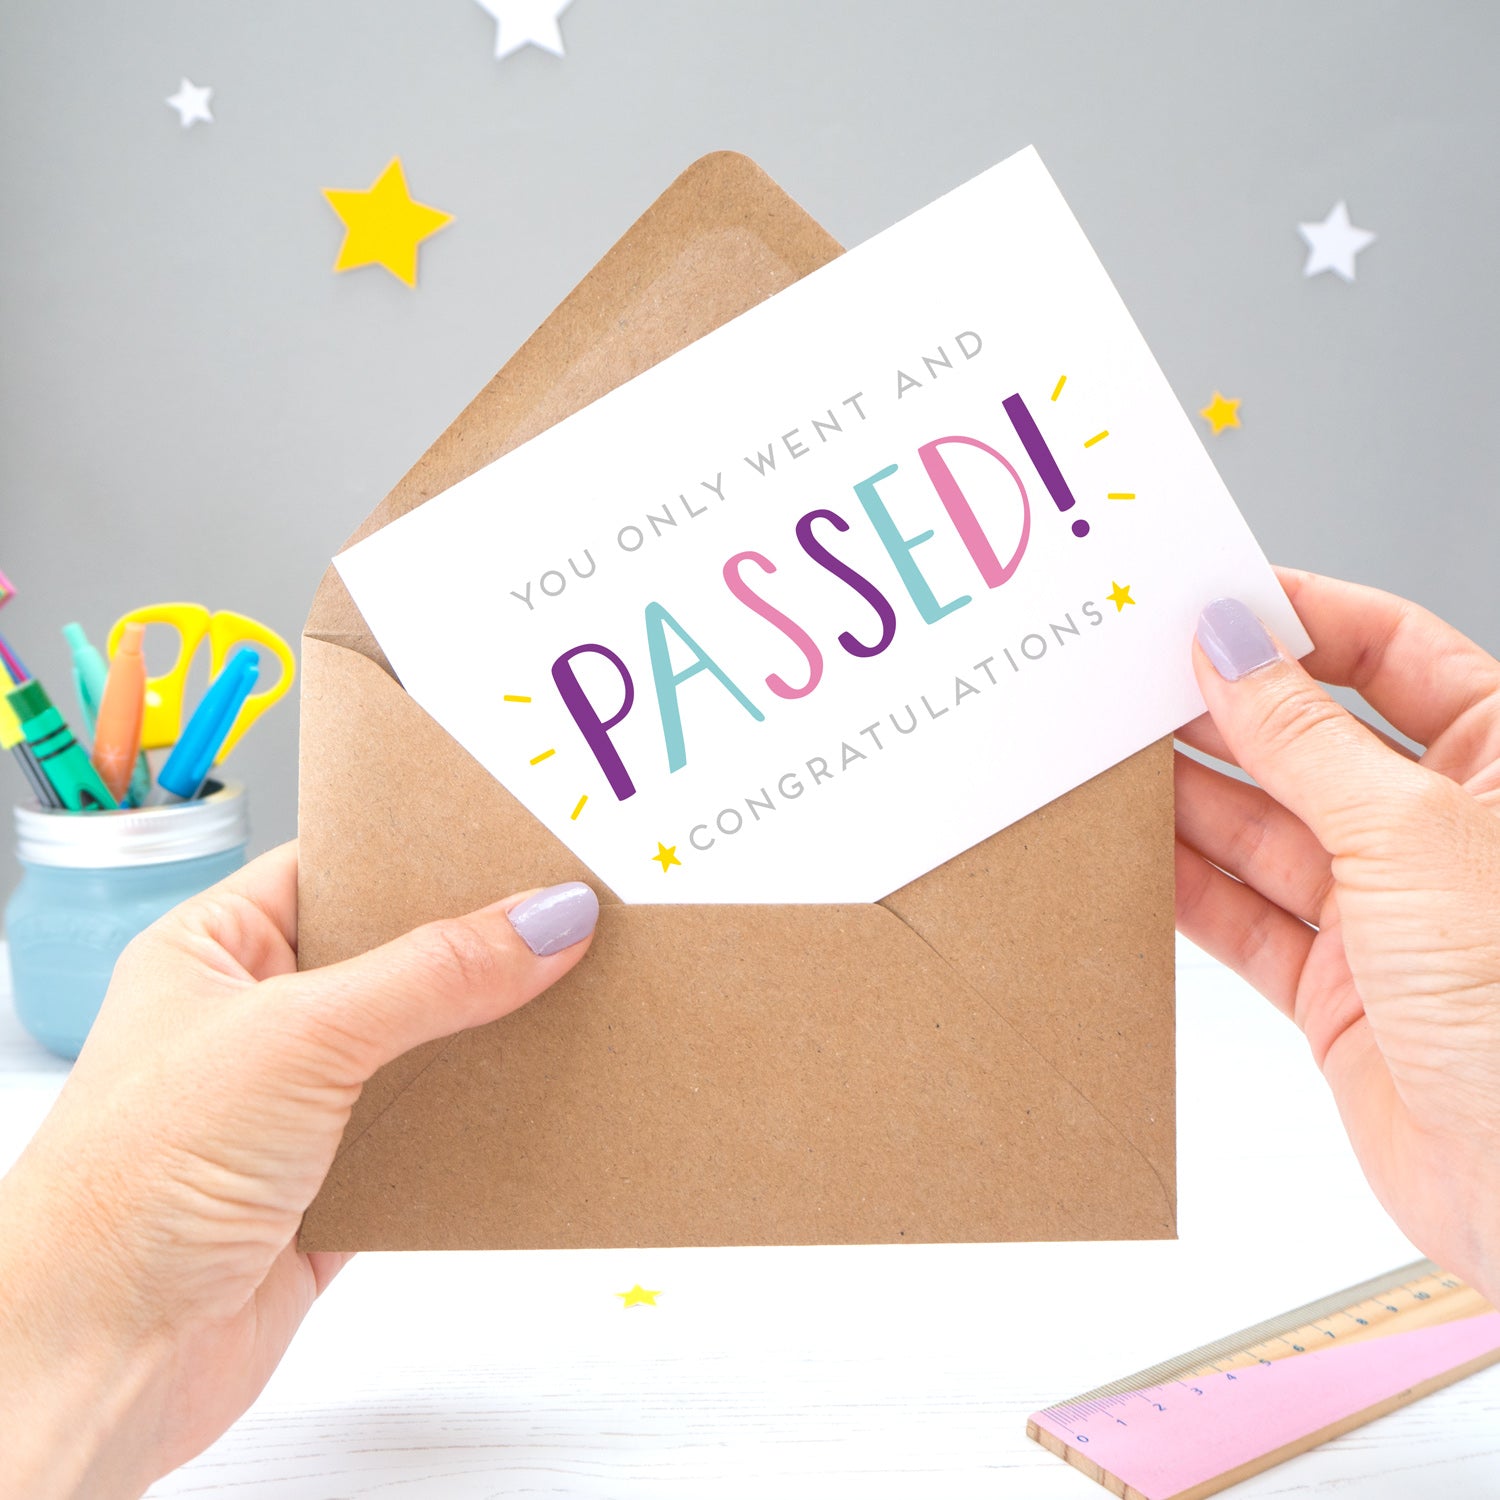 'You only went and passed! Congratulations!' A congratulations card for someone who has completed their exams recently. It features grey text with the word 'passed' in a hand lettered font with varying tones of blue, pink and purple, and yellow stars.